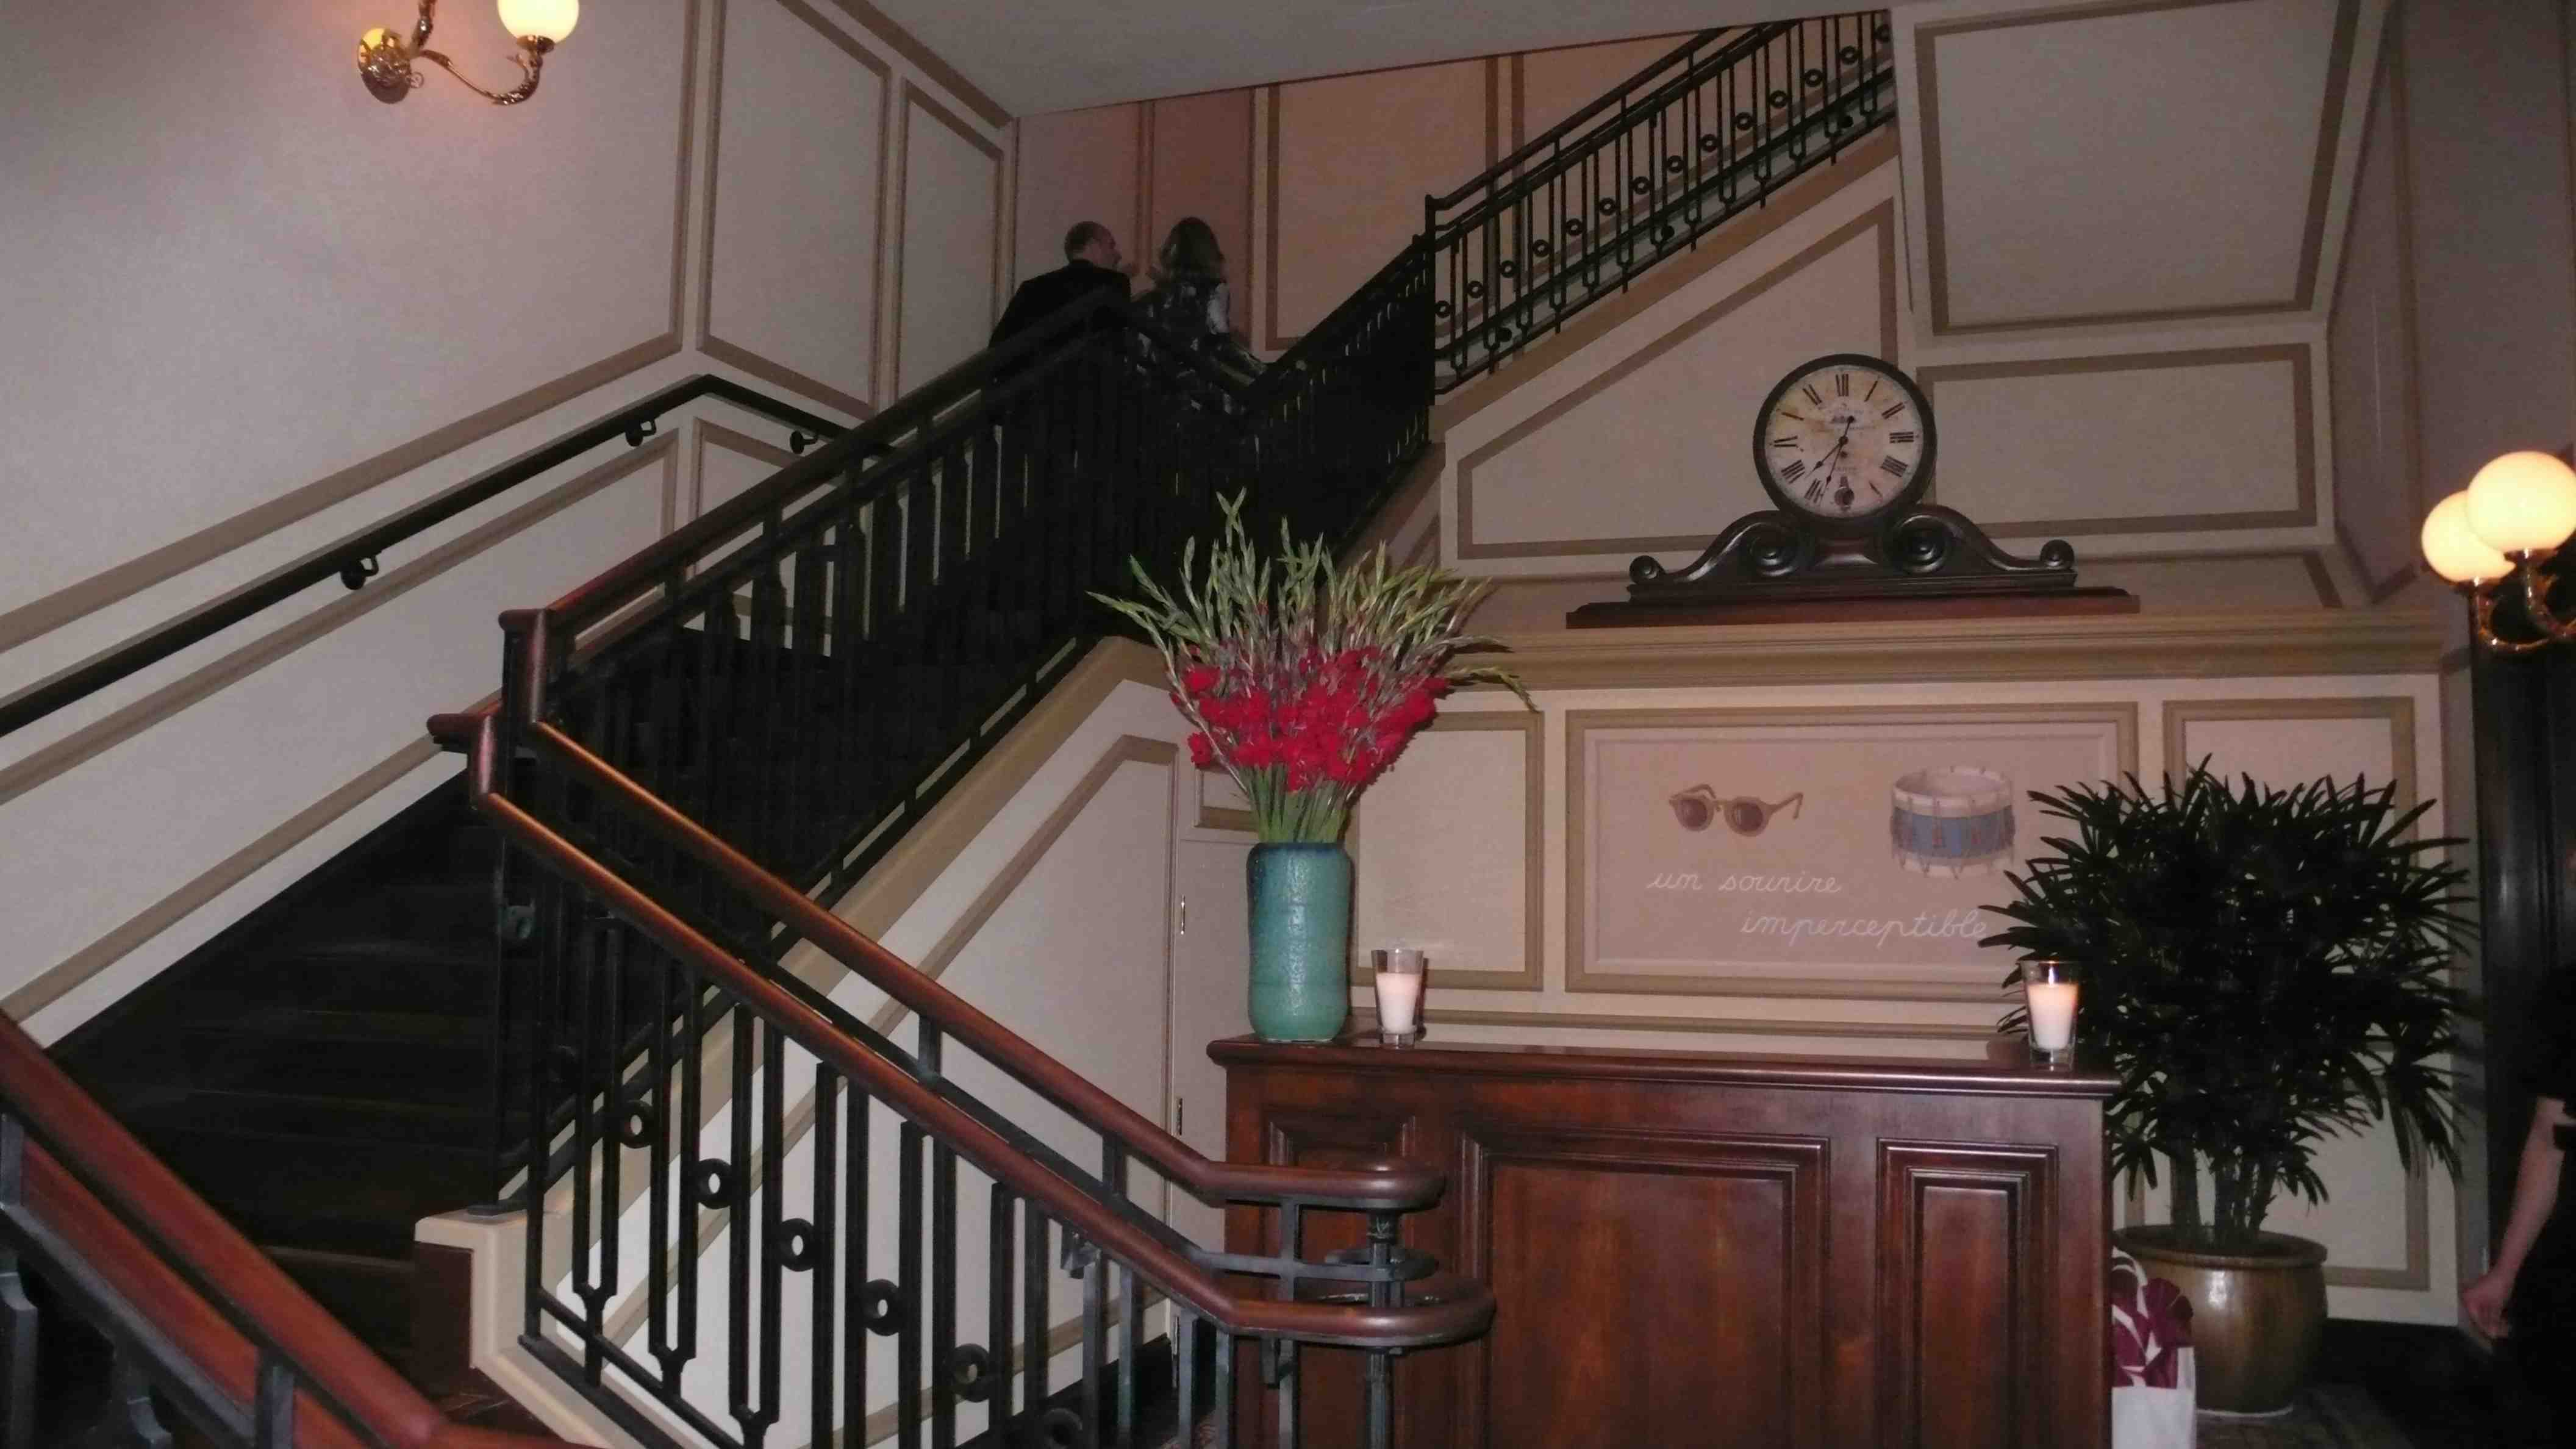 Entrance and stairway